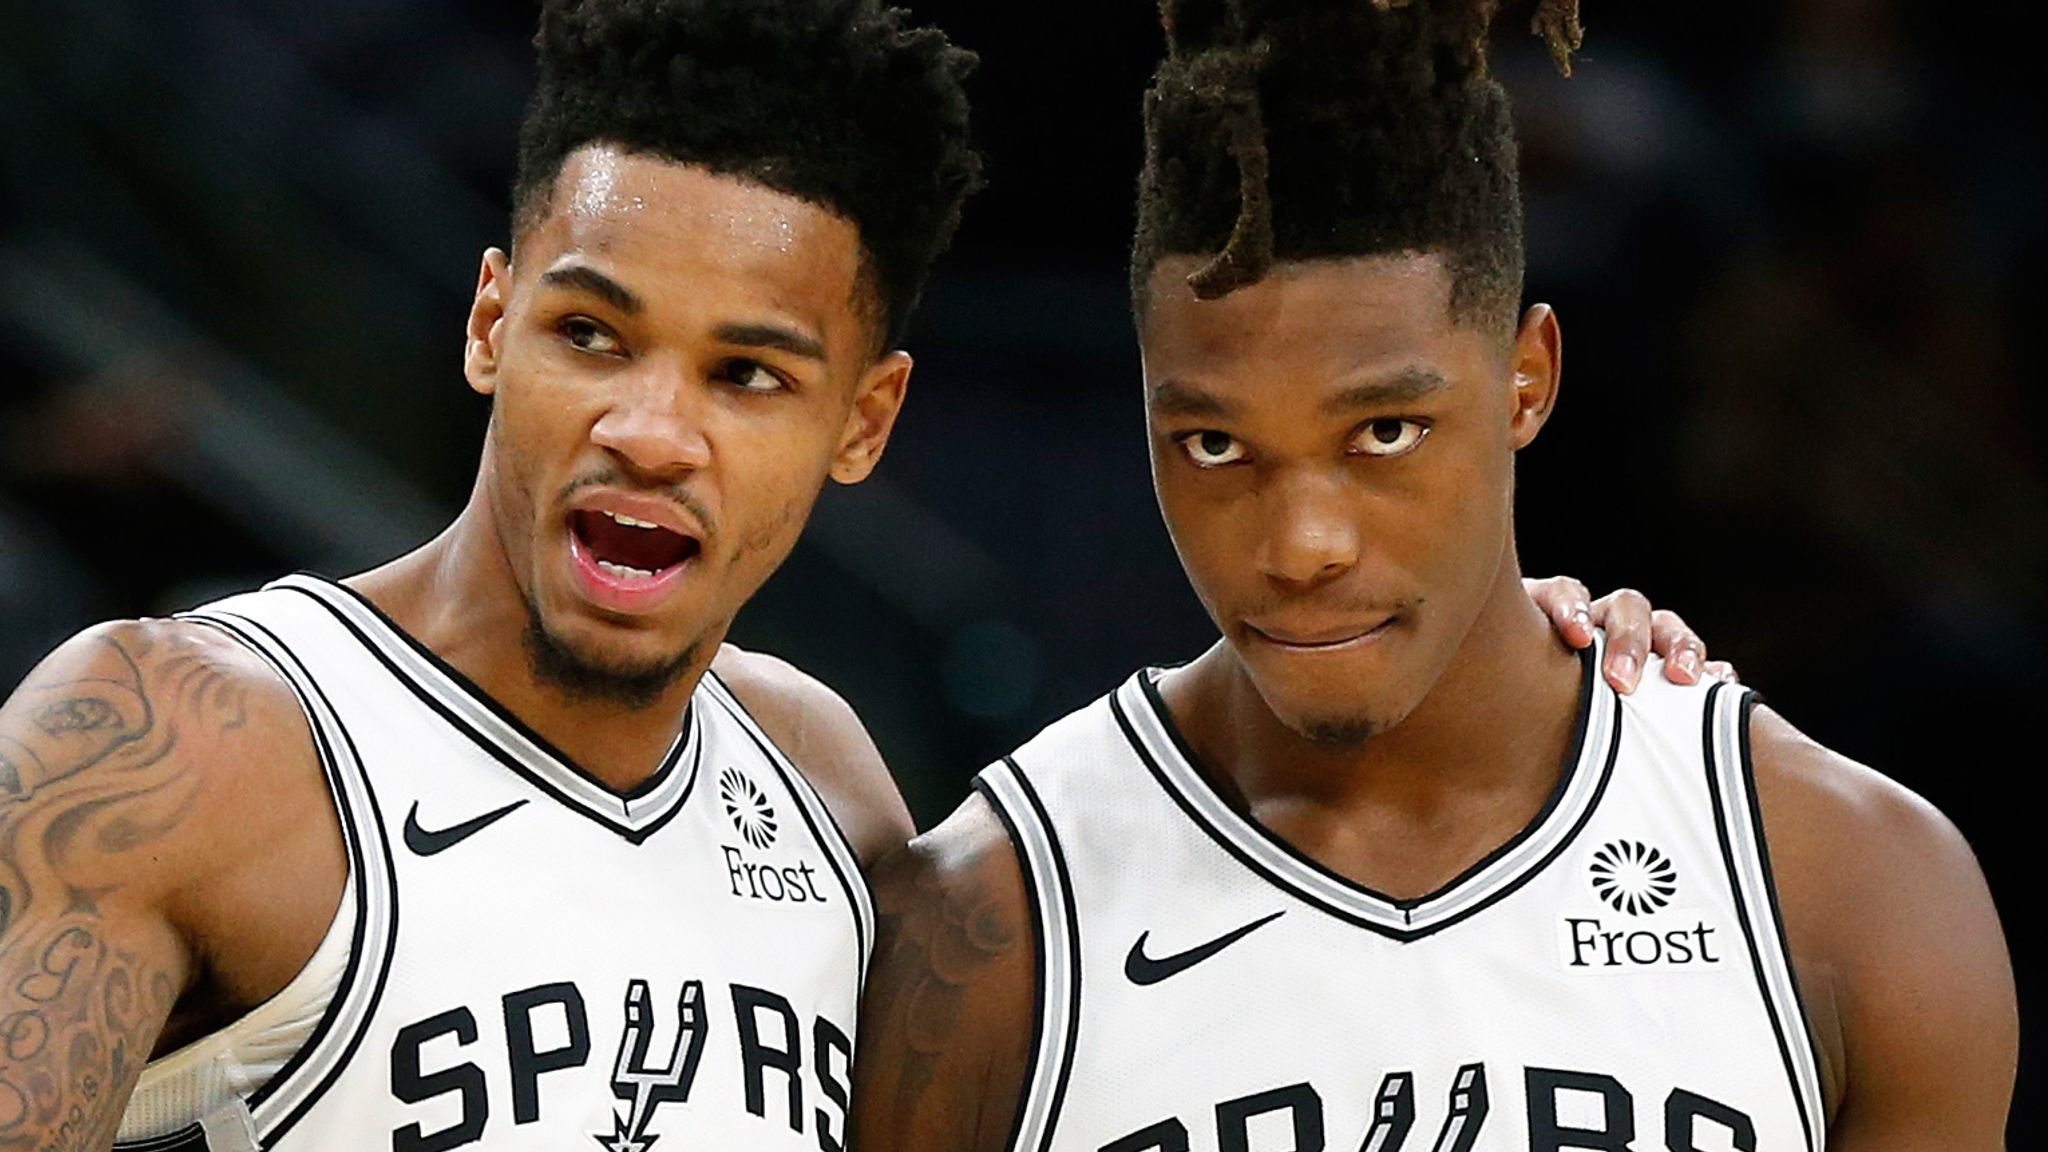 Fans debate if Spurs' Dejounte Murray will become an all-star in